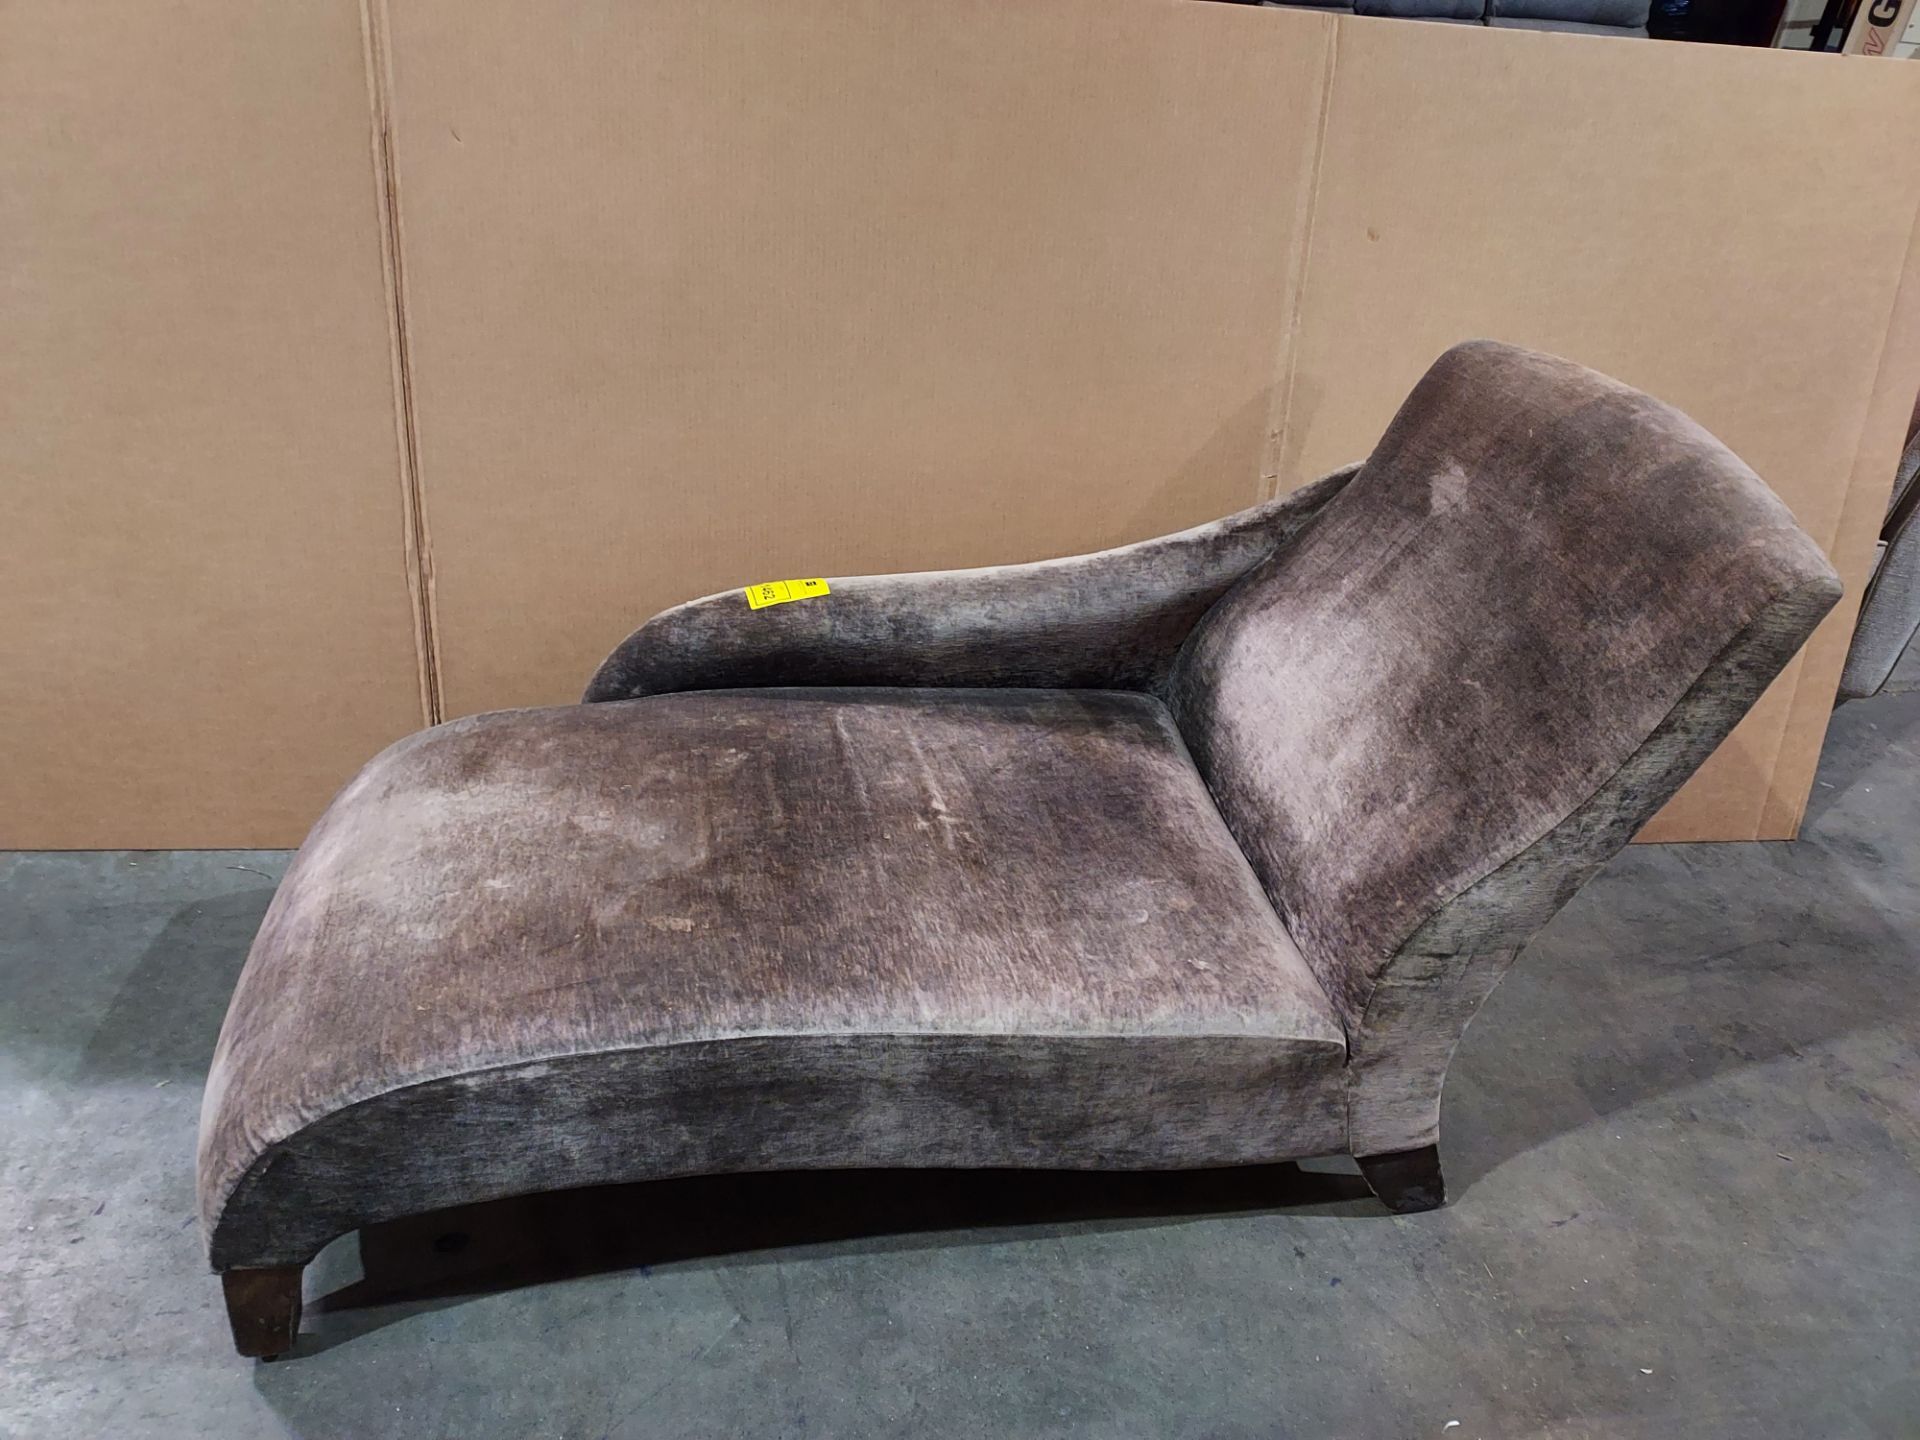 1 X CHAISE LONGUE IN BROWN/GREY (USED)